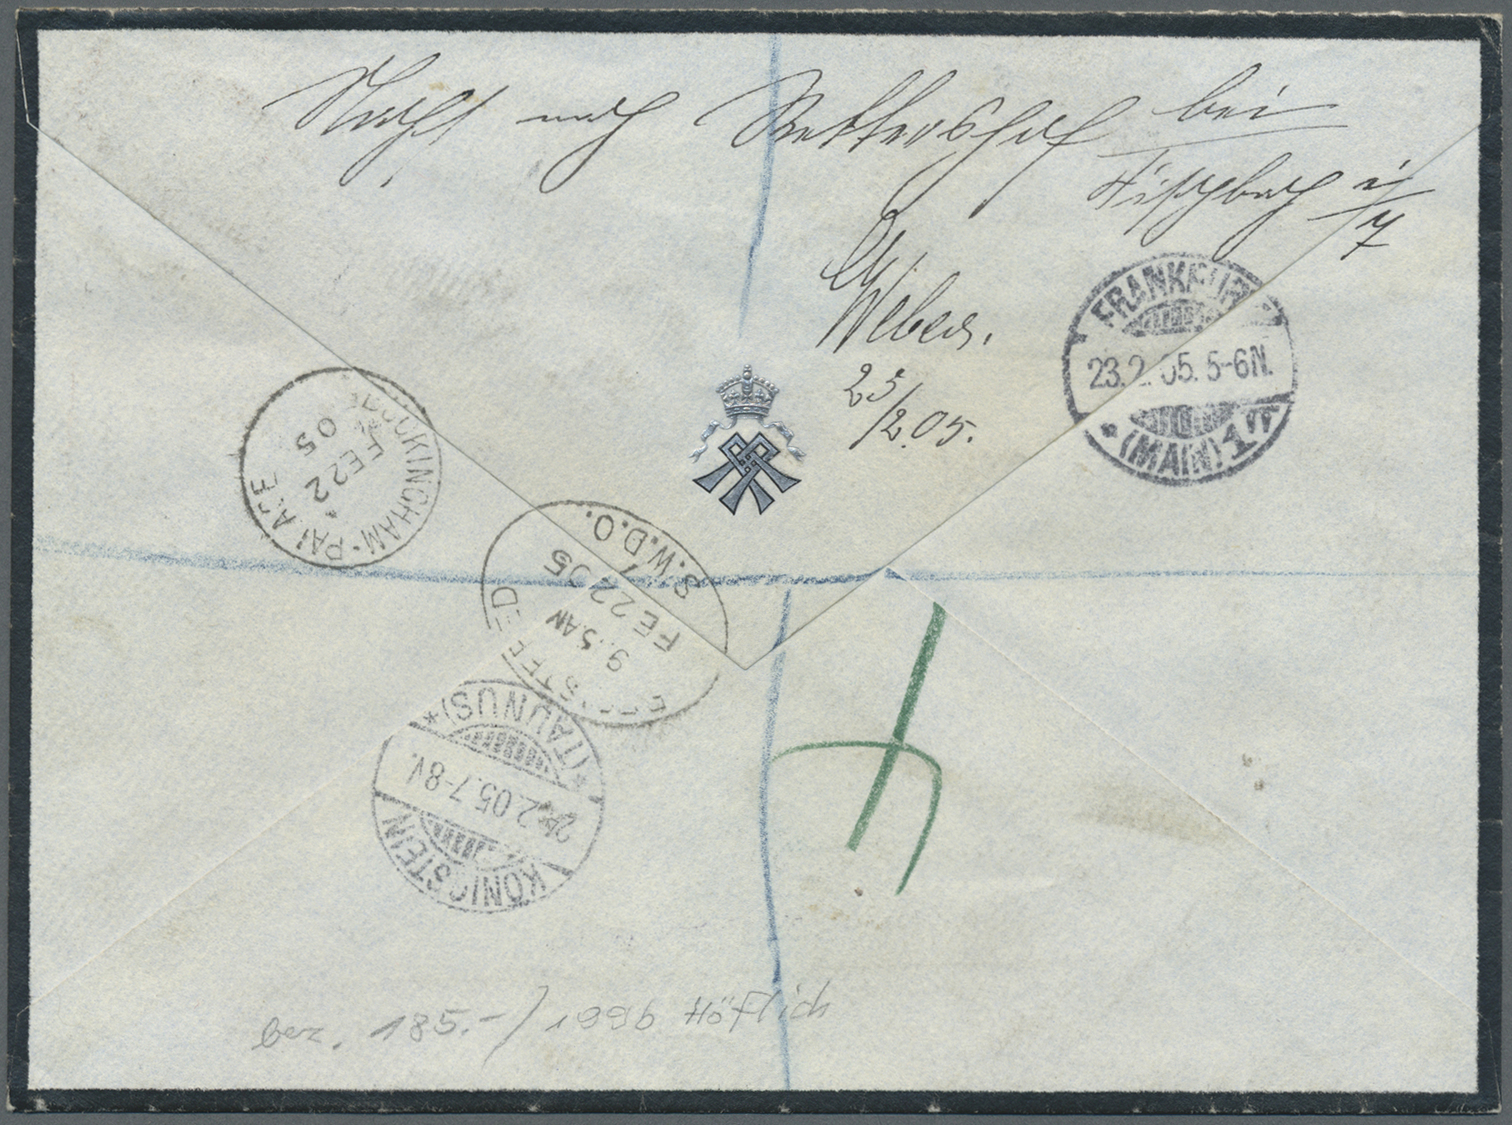 Br Thematik: Königtum, Adel / Royalty, Nobility: 1905, Larger Size Mourning Cover Franked With 2 And 5 D Edward VII Sent - Royalties, Royals